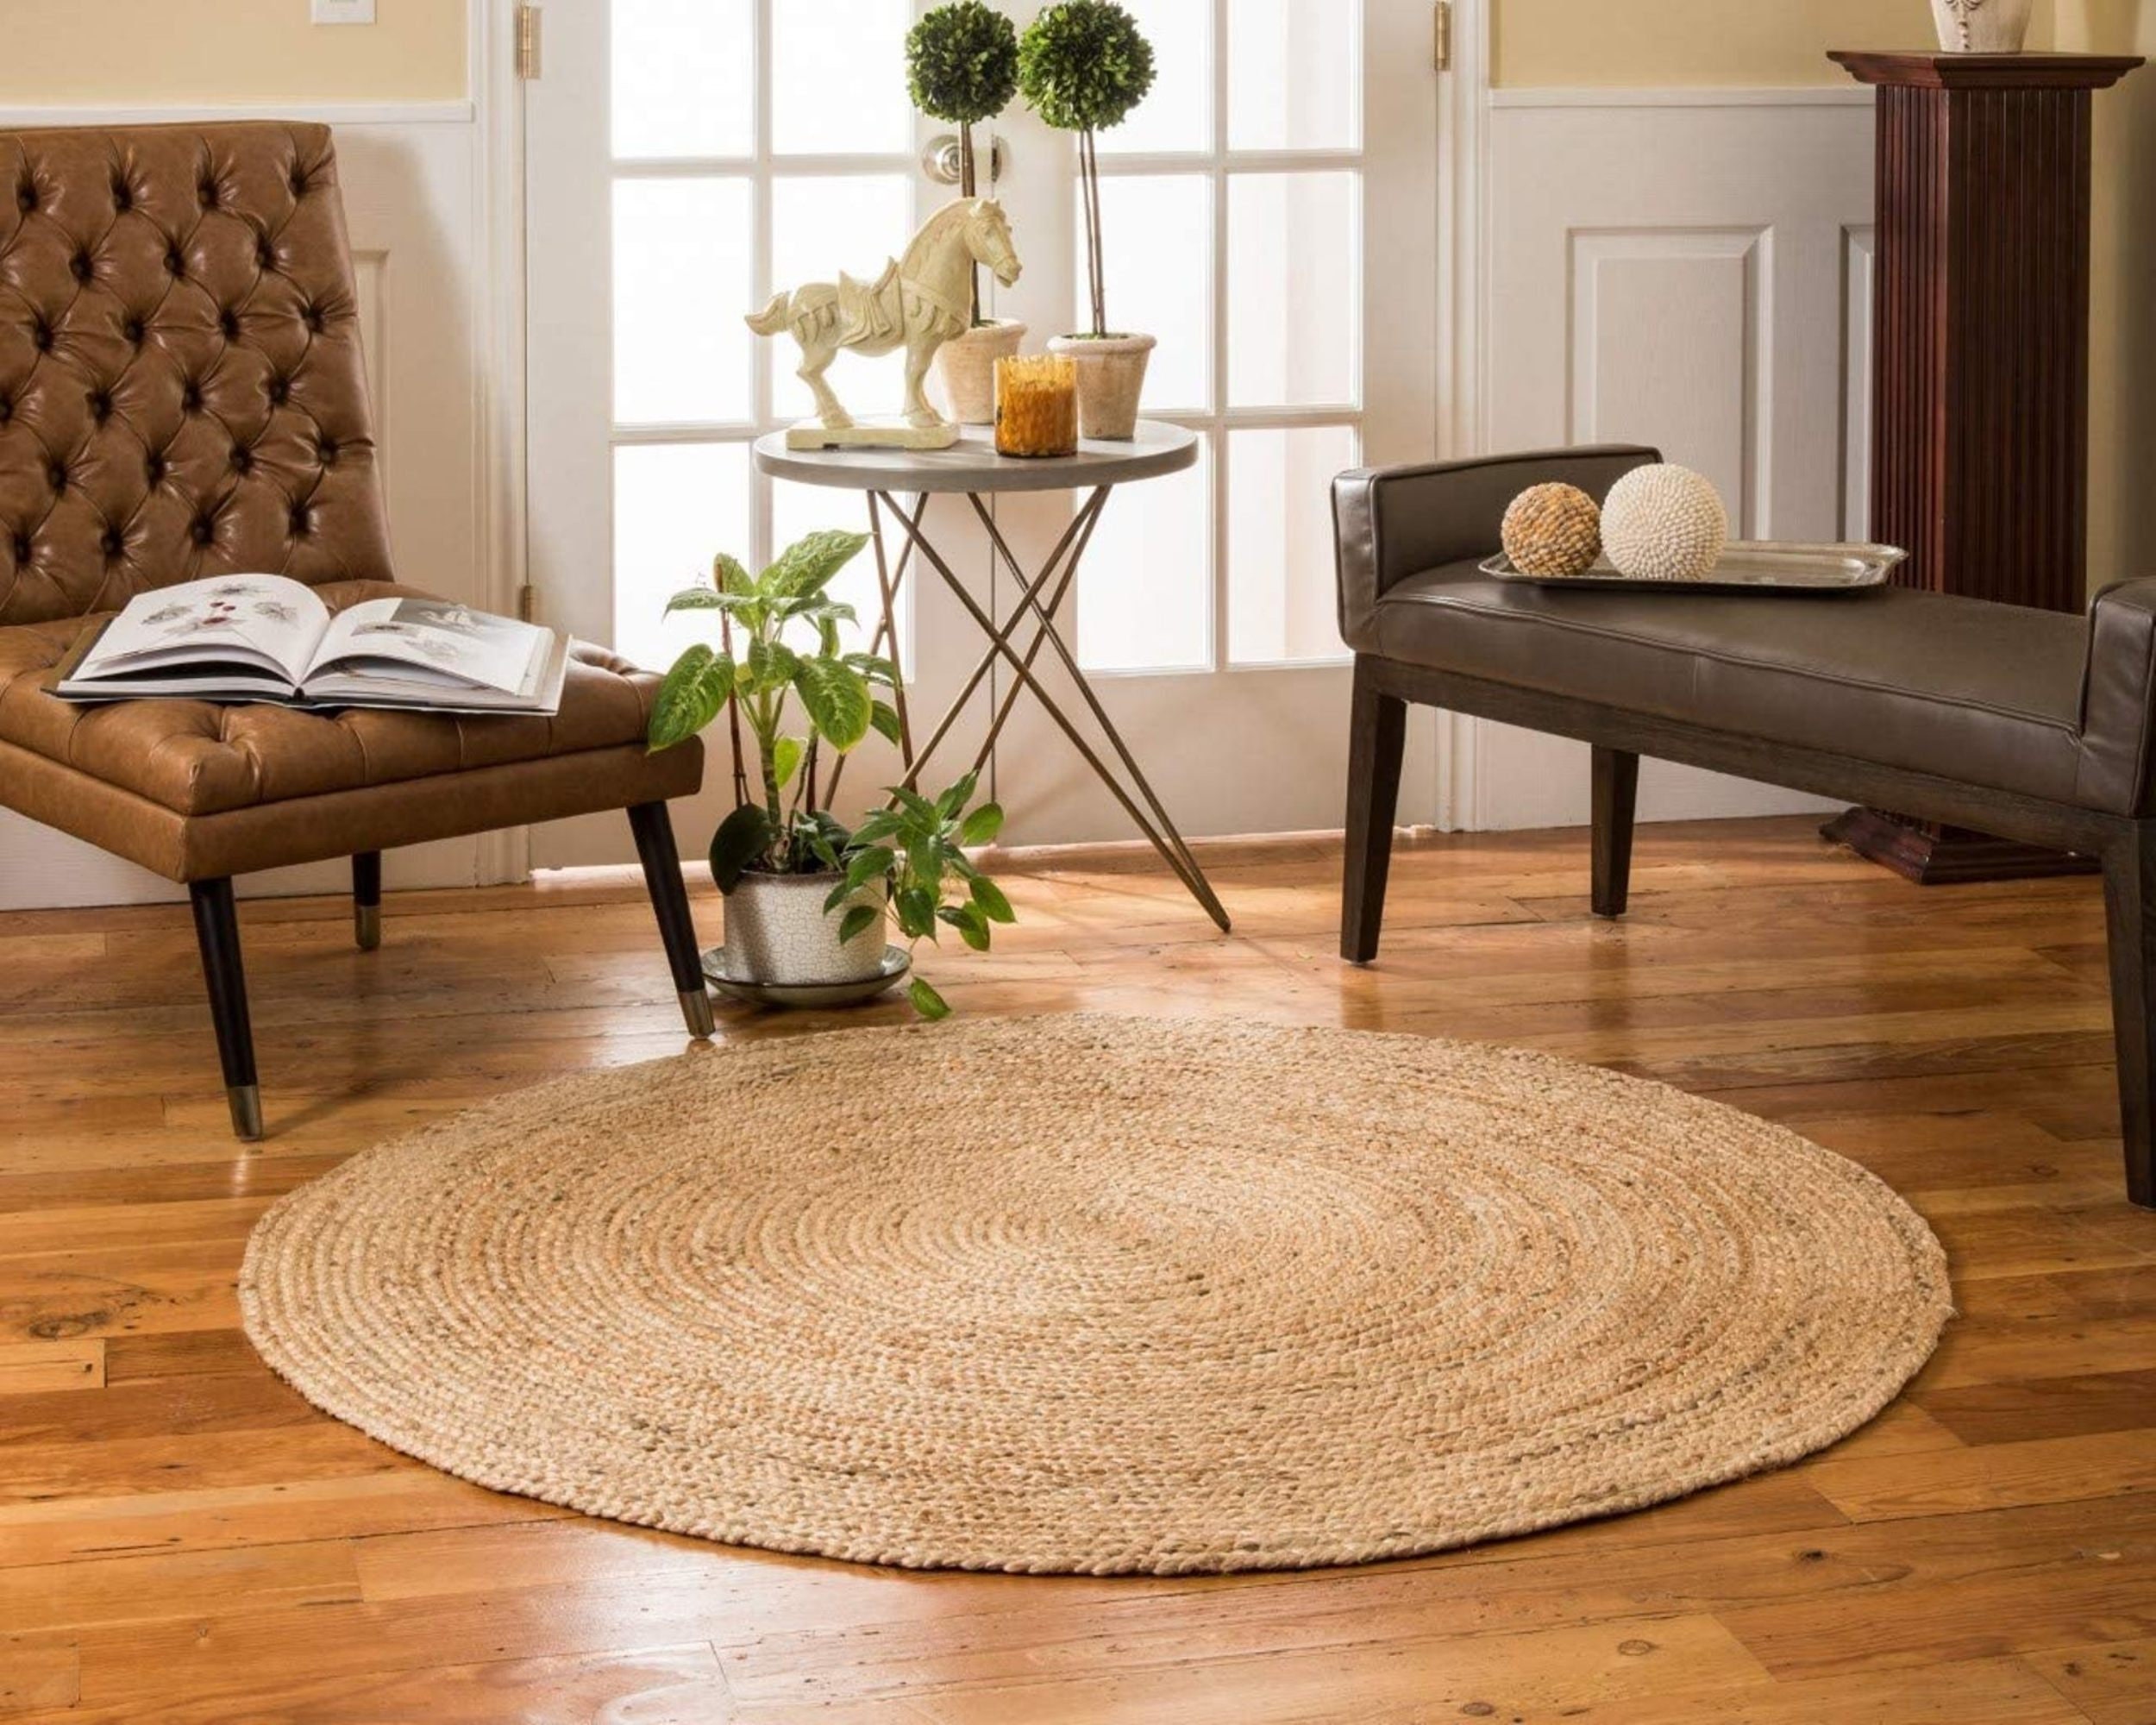 circle rug for kitchen table